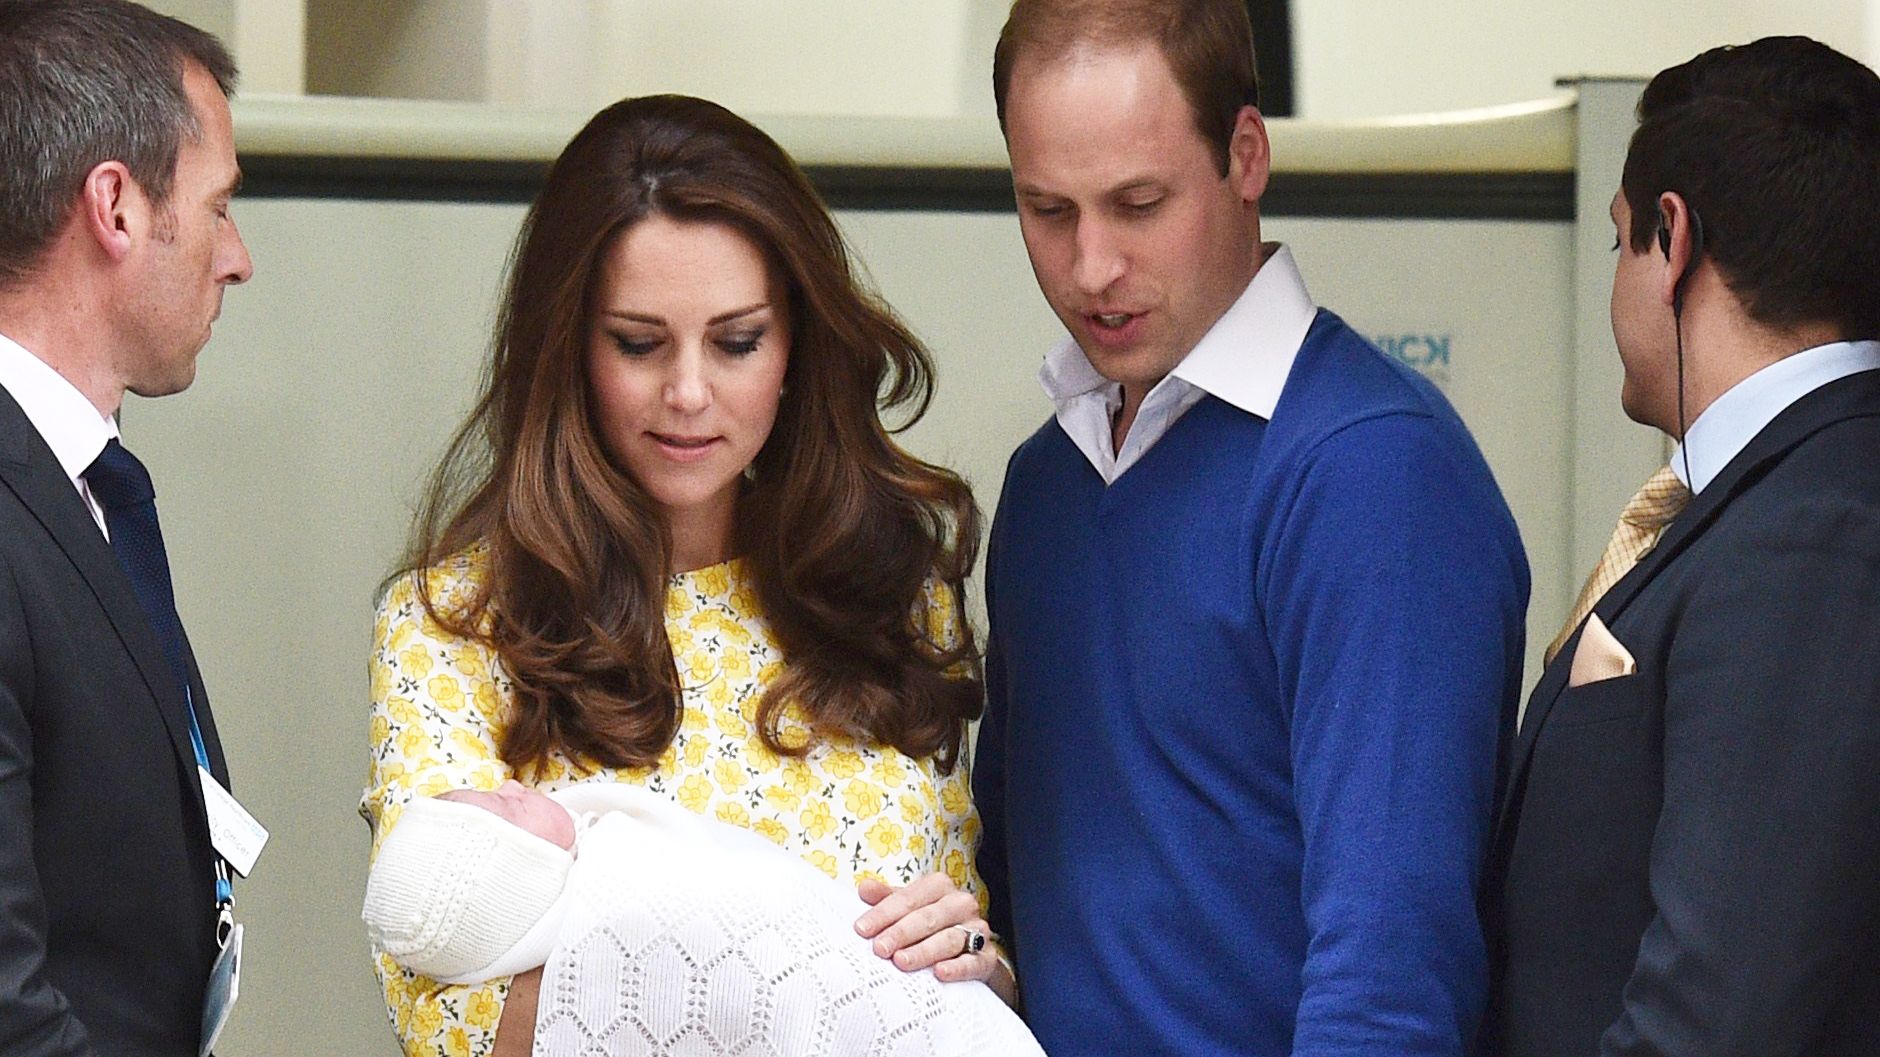 William and Catherine present their newborn daughter as they leave a London hospital in May 2015.